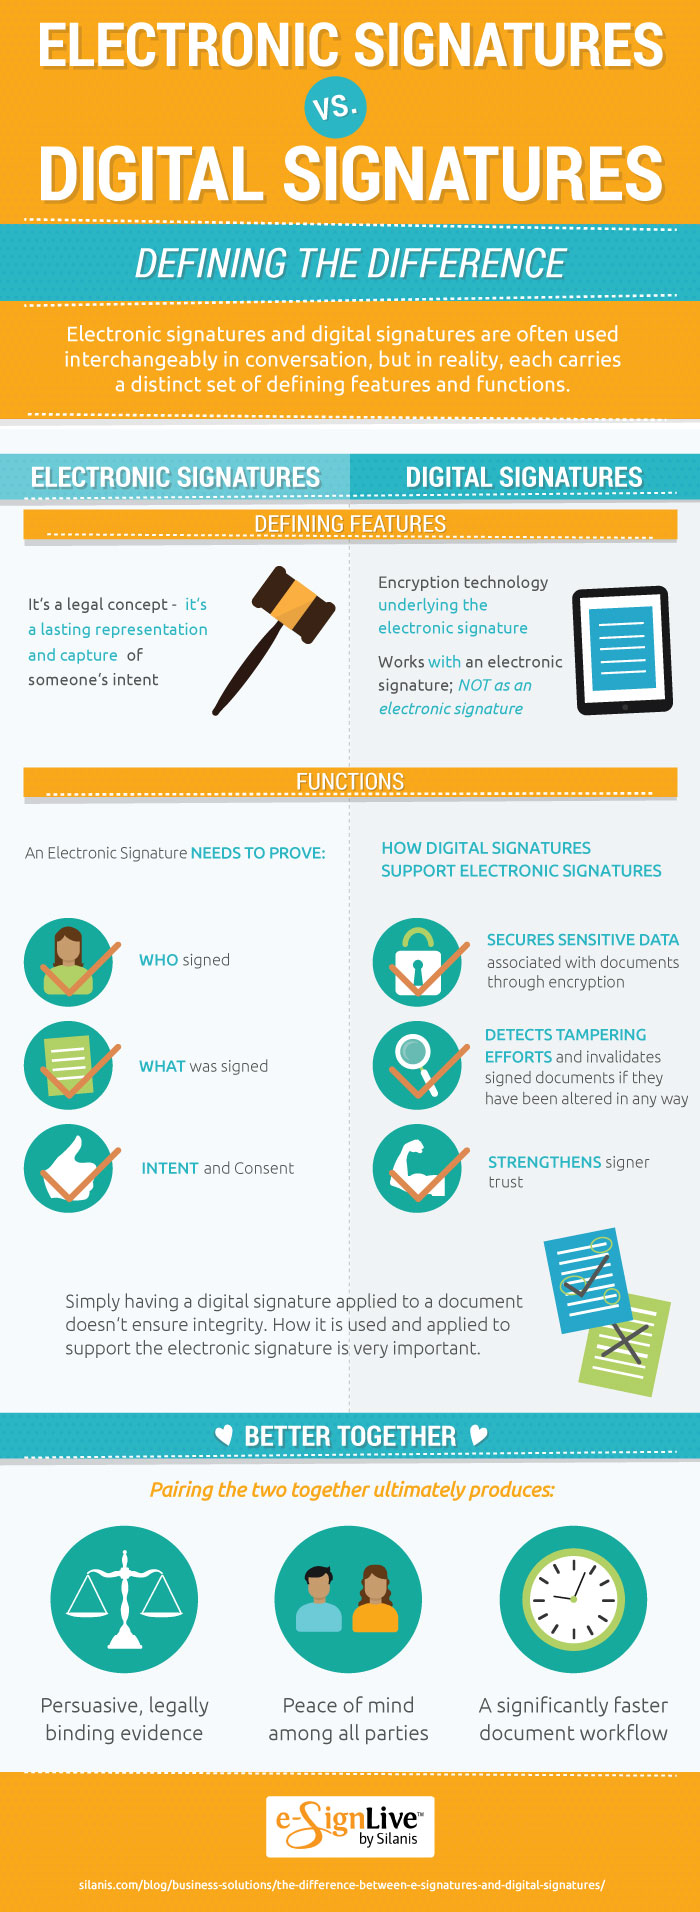 Electronic Signatures Vs. Digital Signatures – Defining the Difference [Infographic]